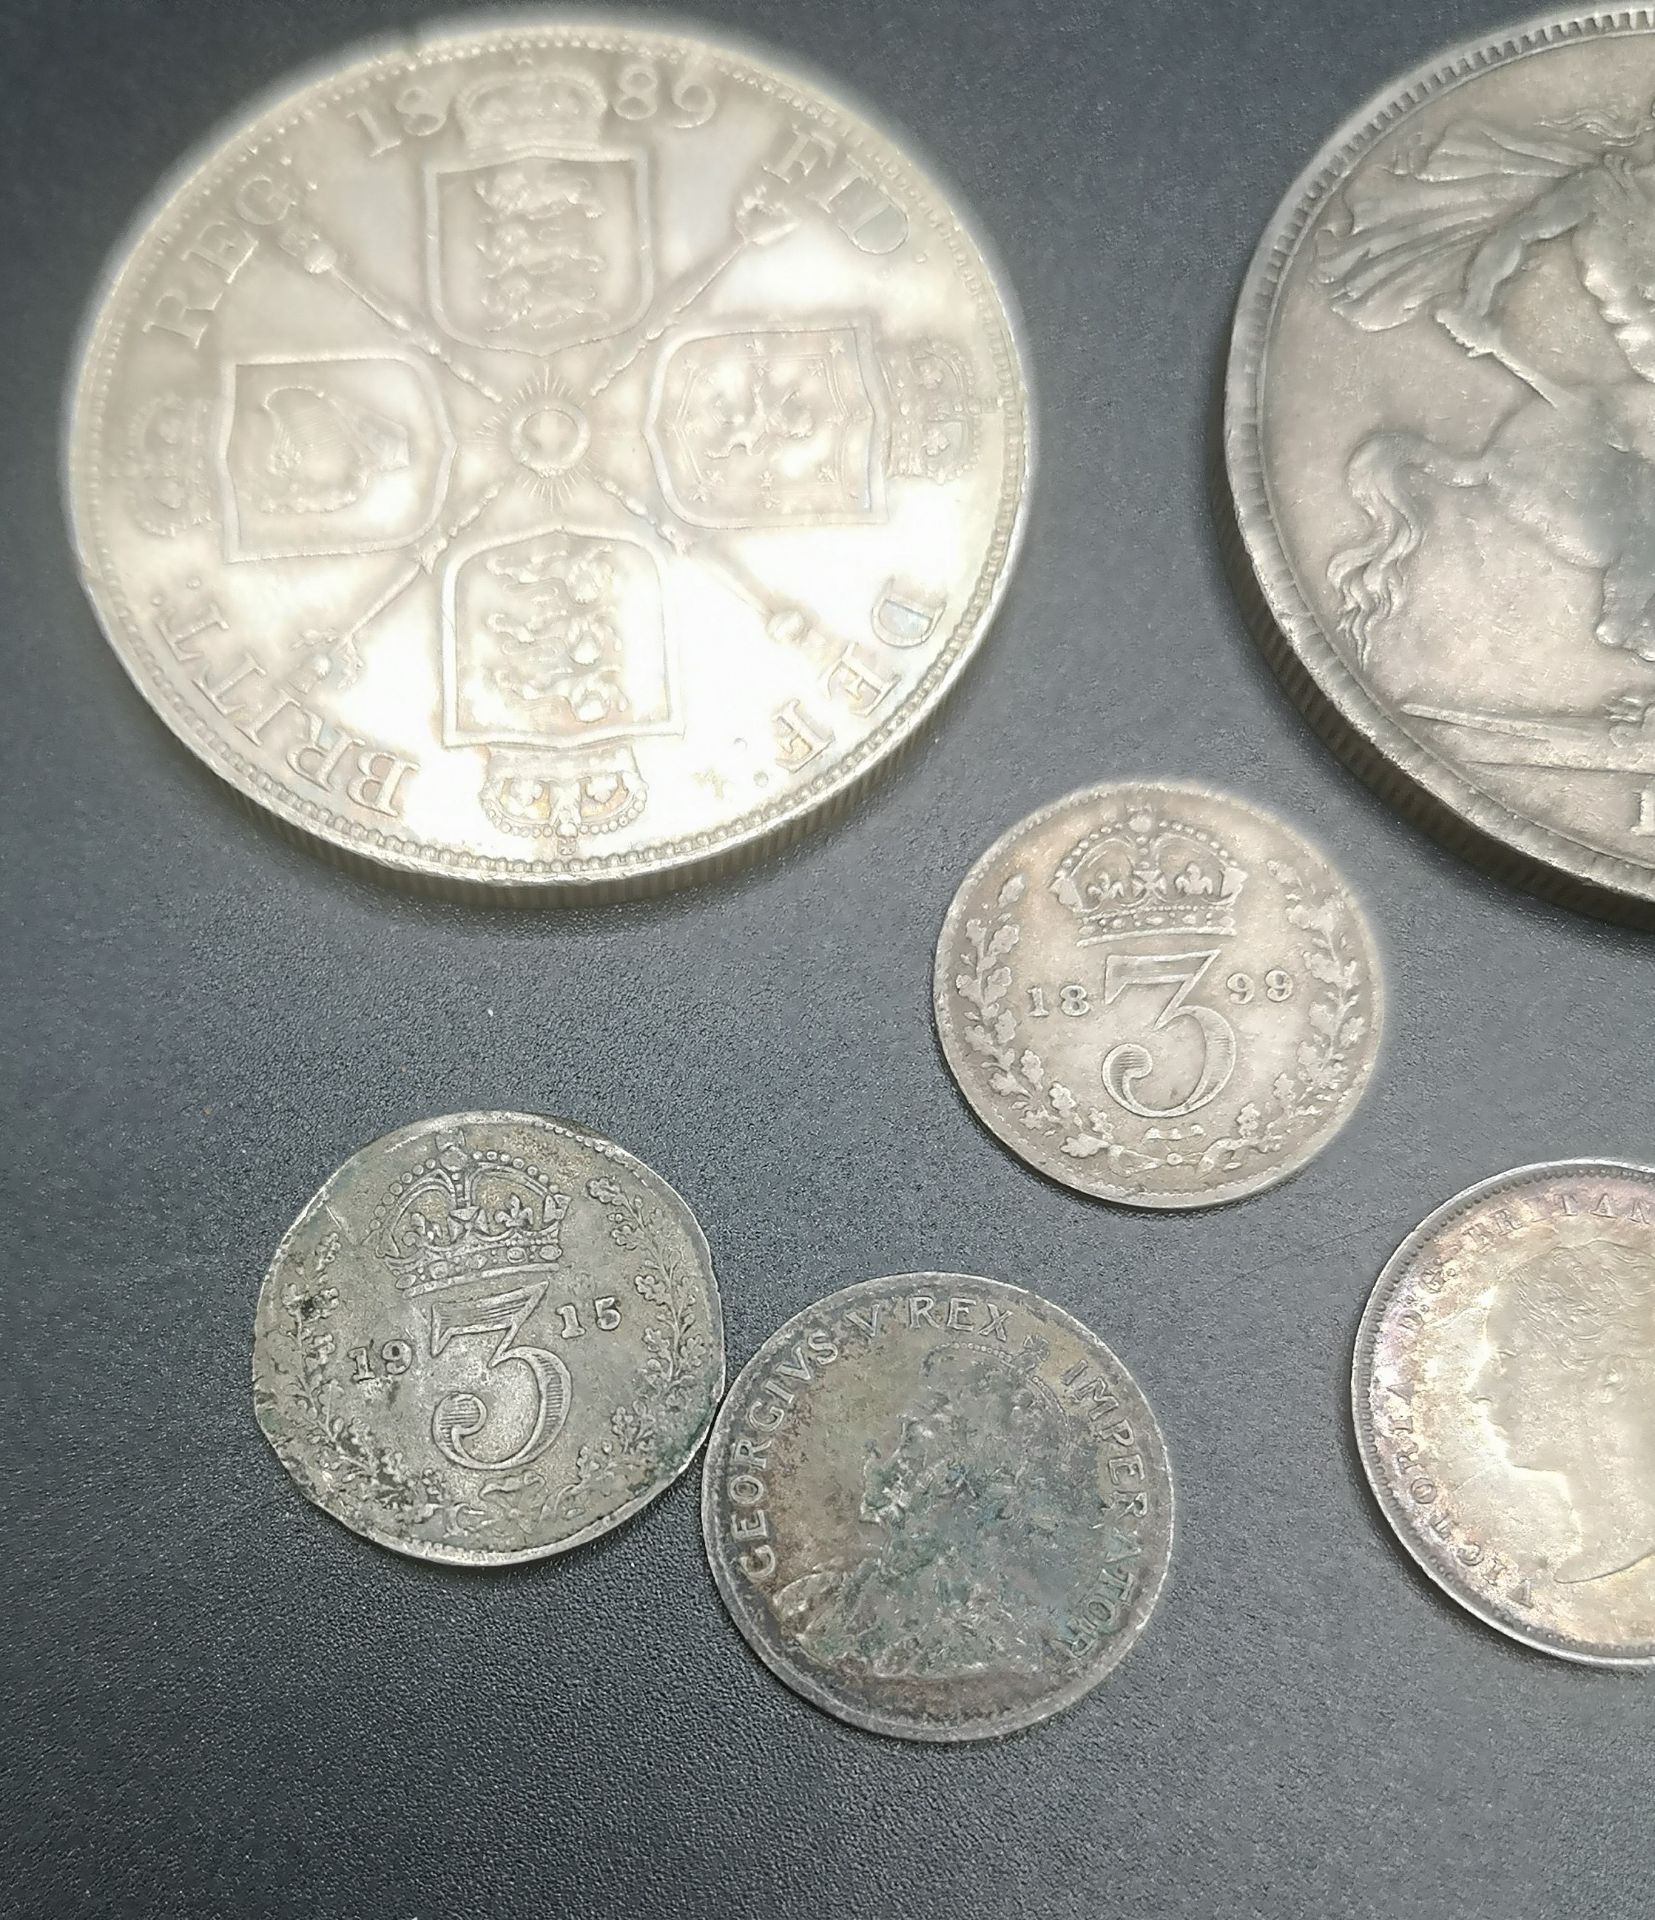 Queen Victoria crown 1890, double florin 1889, and 4 other silver coins - Image 5 of 8